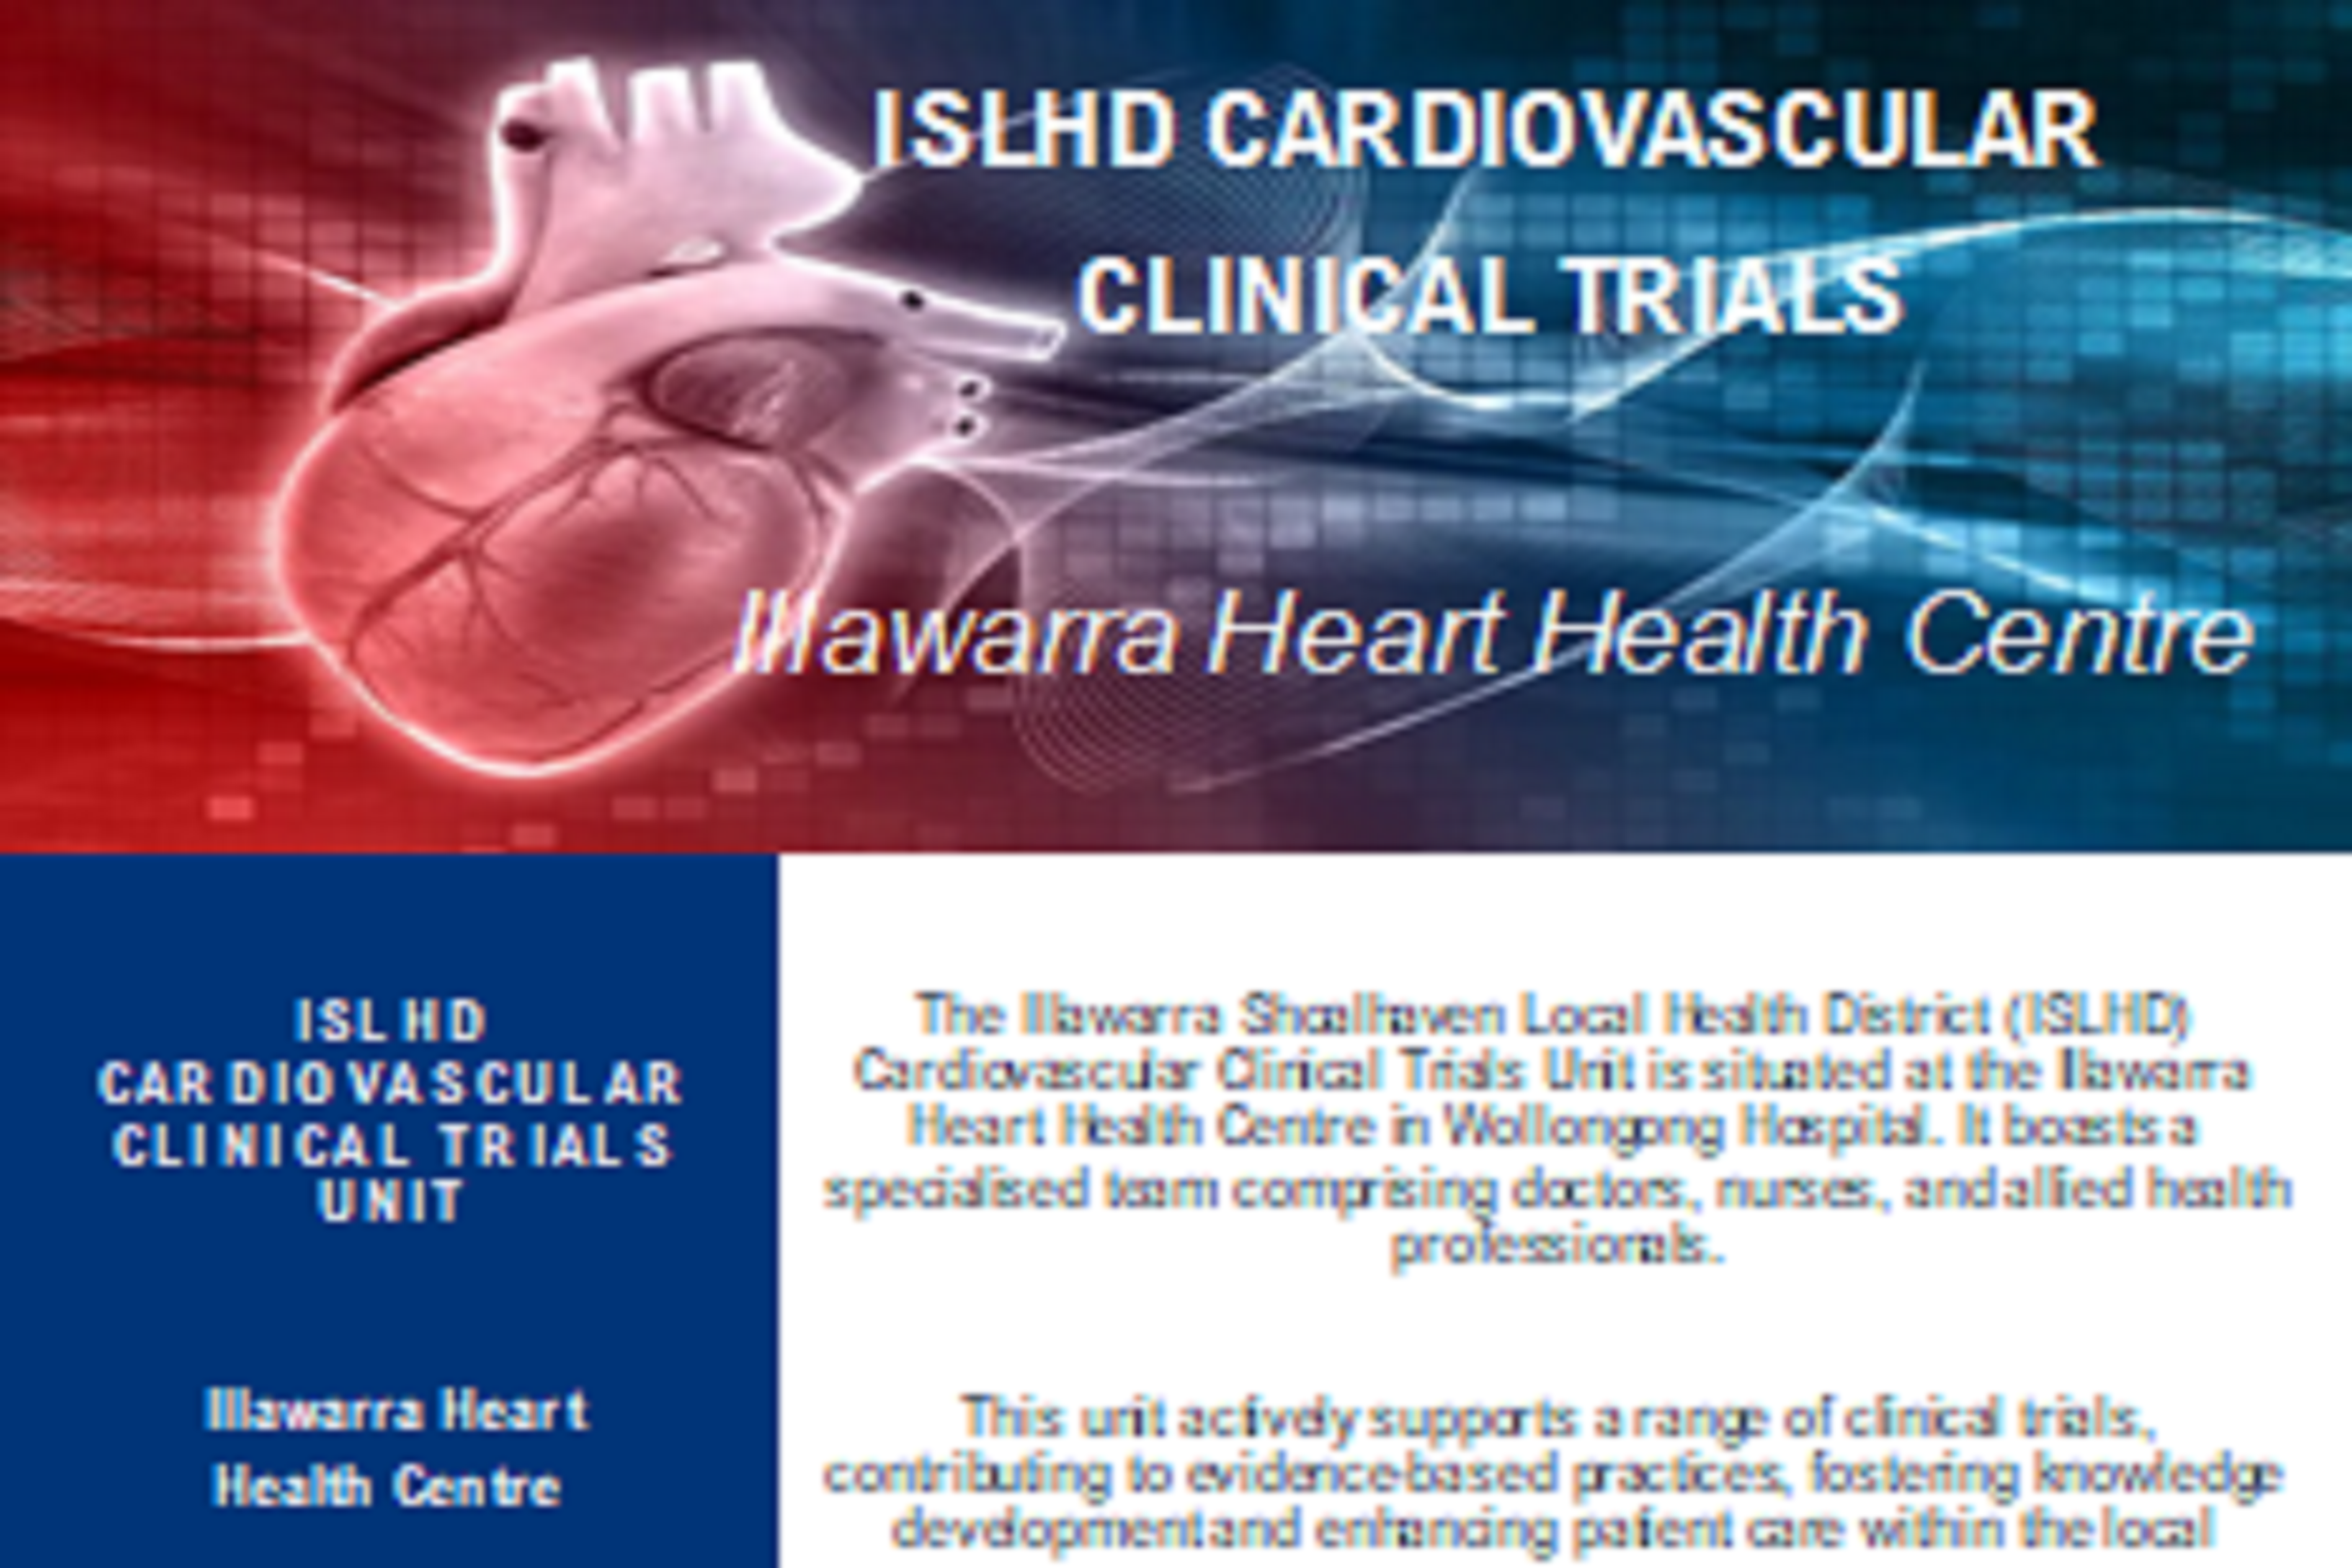 Cardiovascular Clinical Trial Newsletters